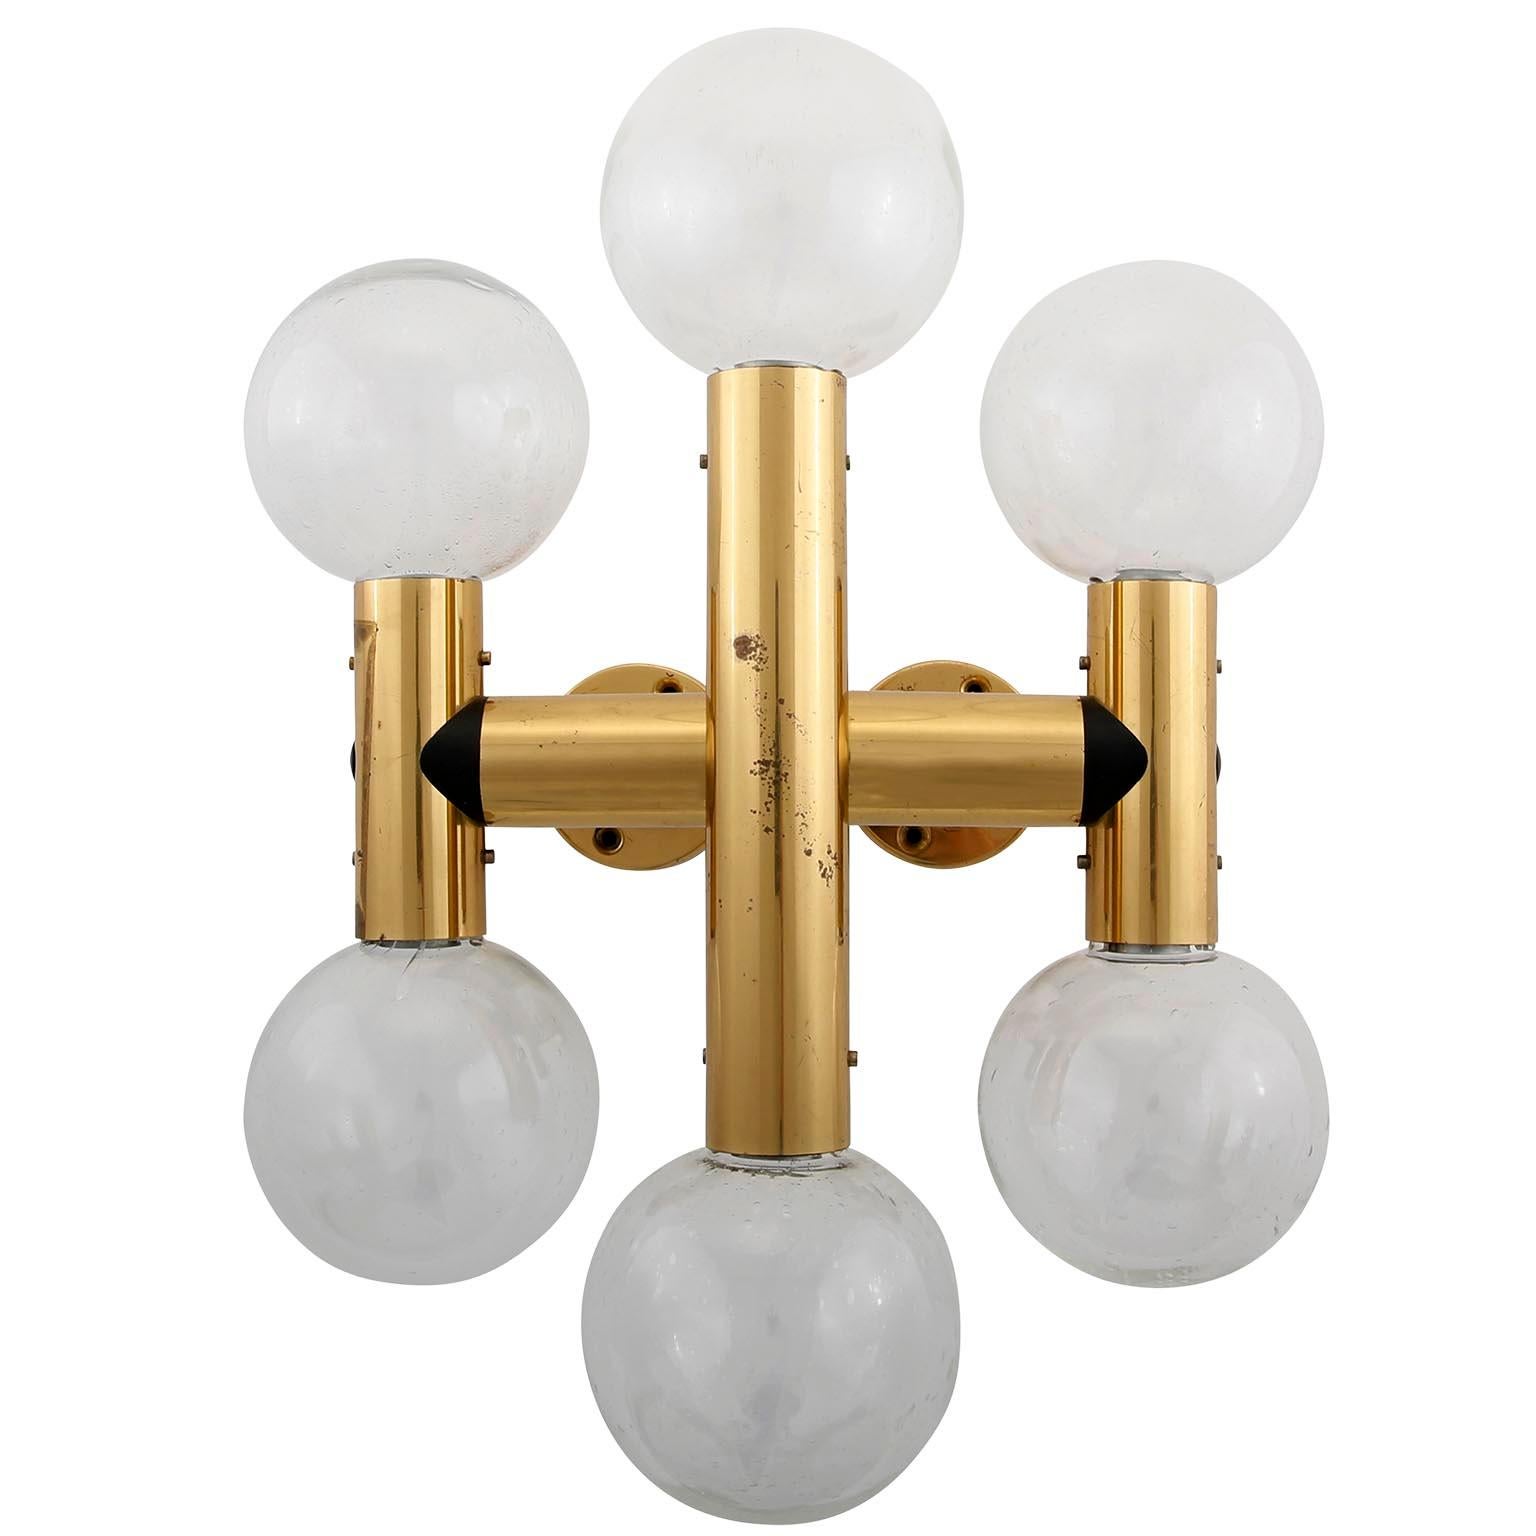 A pair of large six-arm wall lamps or flush mount light fixtures model 'RS 6 WA' by J.T. Kalmar, Austria, manufactured in midcentury in 1970s.
The fixtures are made of polished brass and 6 hand blown bubble glass lamp shades with a diameter of 4.7